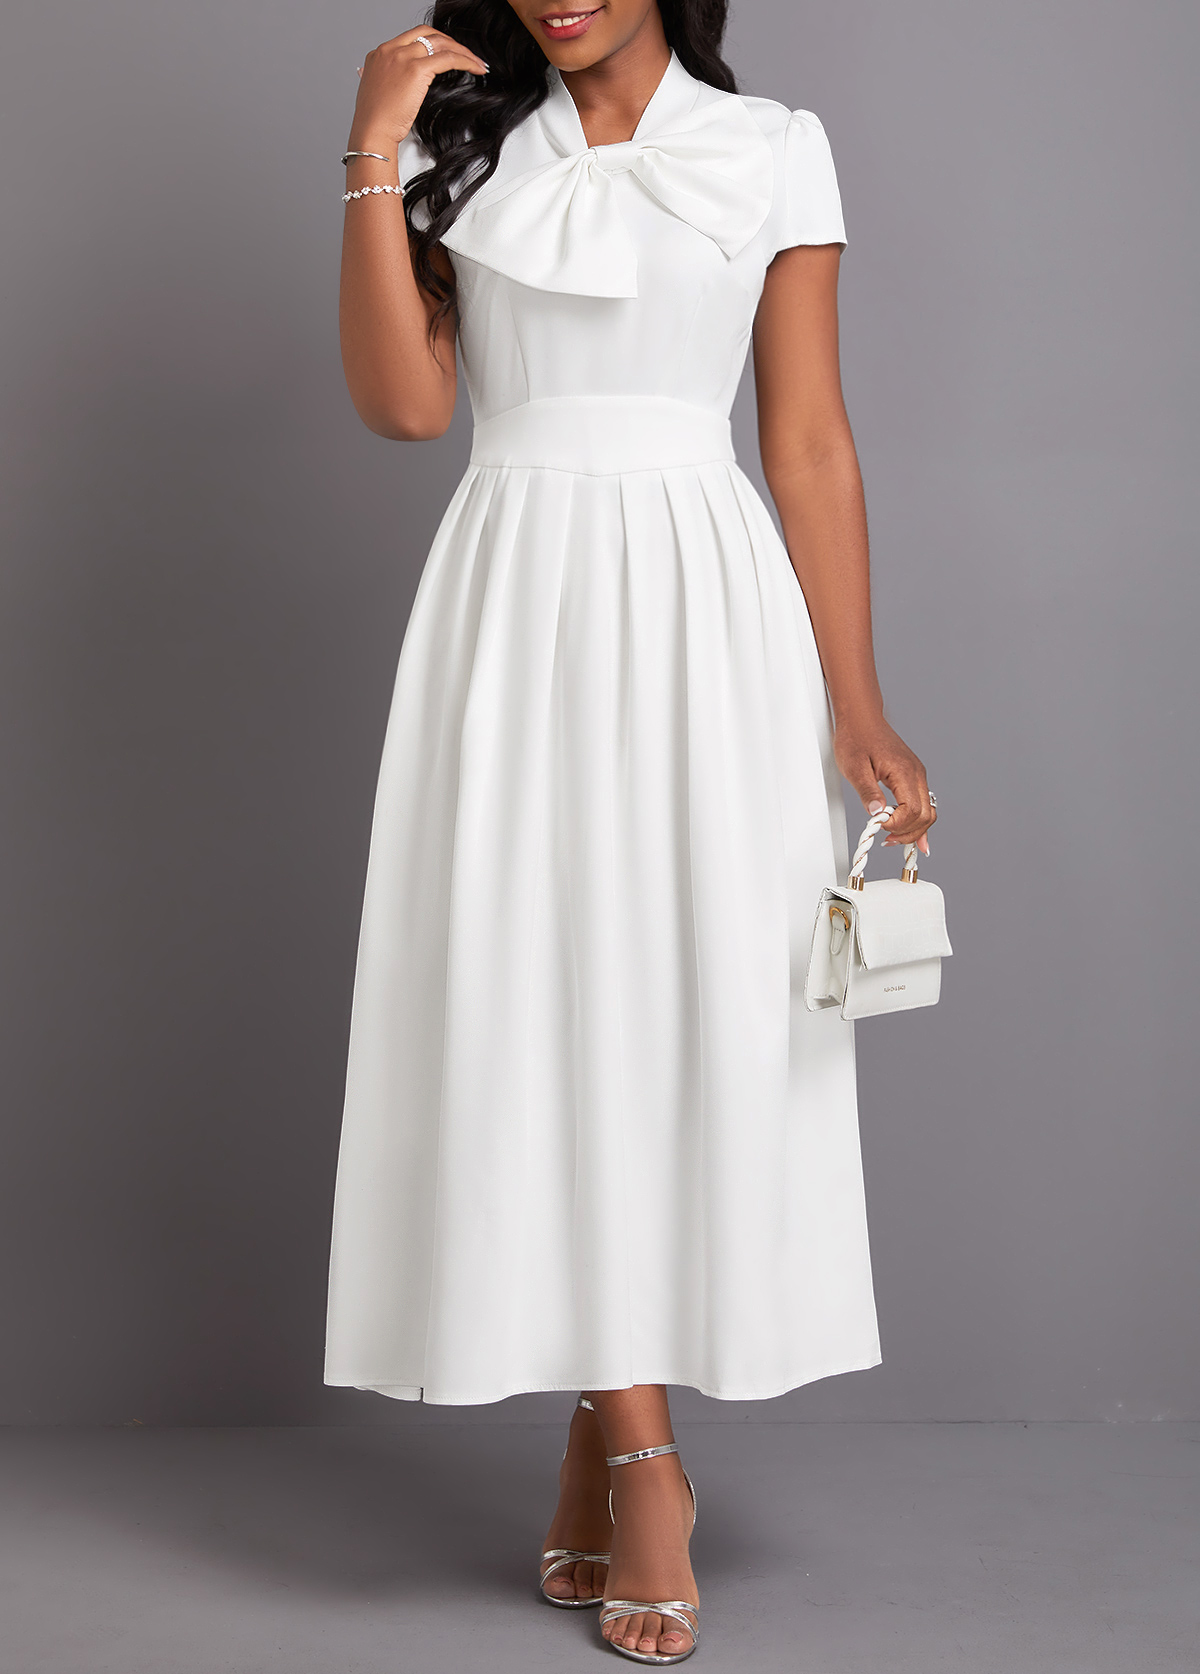 White Bowknot Short Sleeve Stand Collar Dress